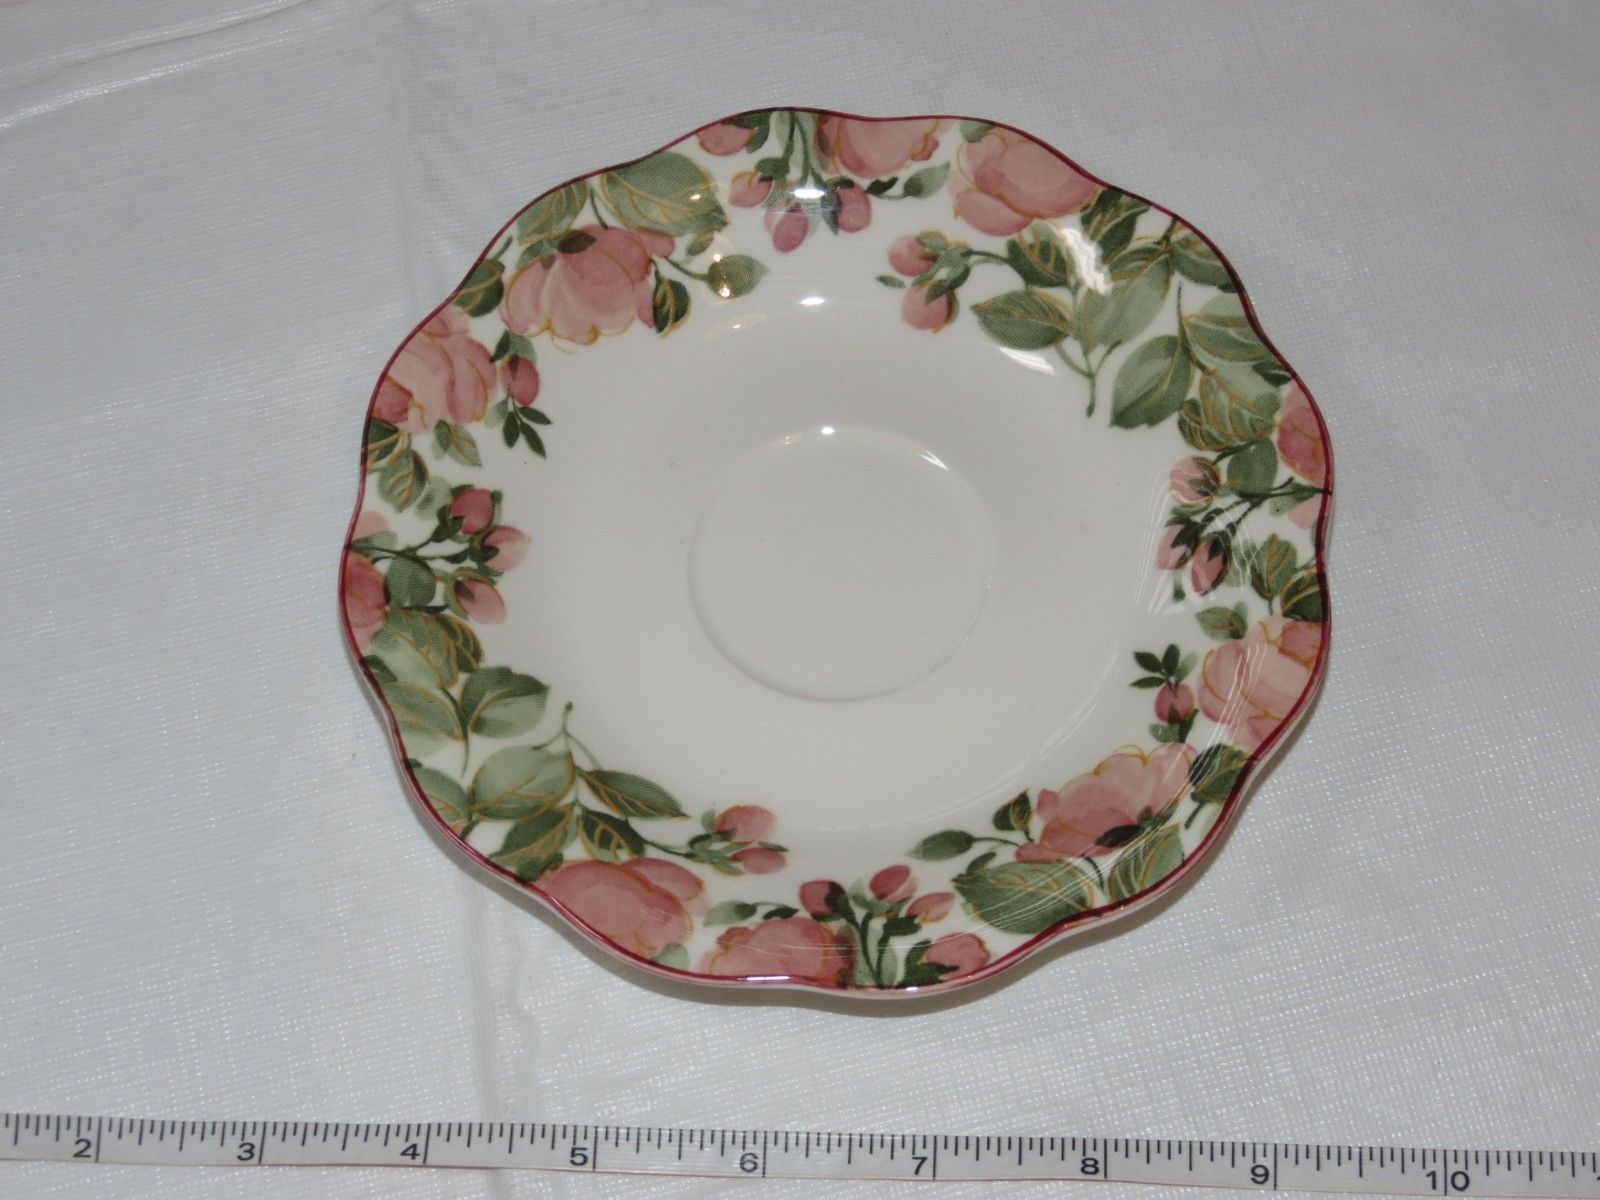 Nikko Tableware Scalloped Edges Saucer 1 Saucer only Off White Pink Flowers! - $15.73